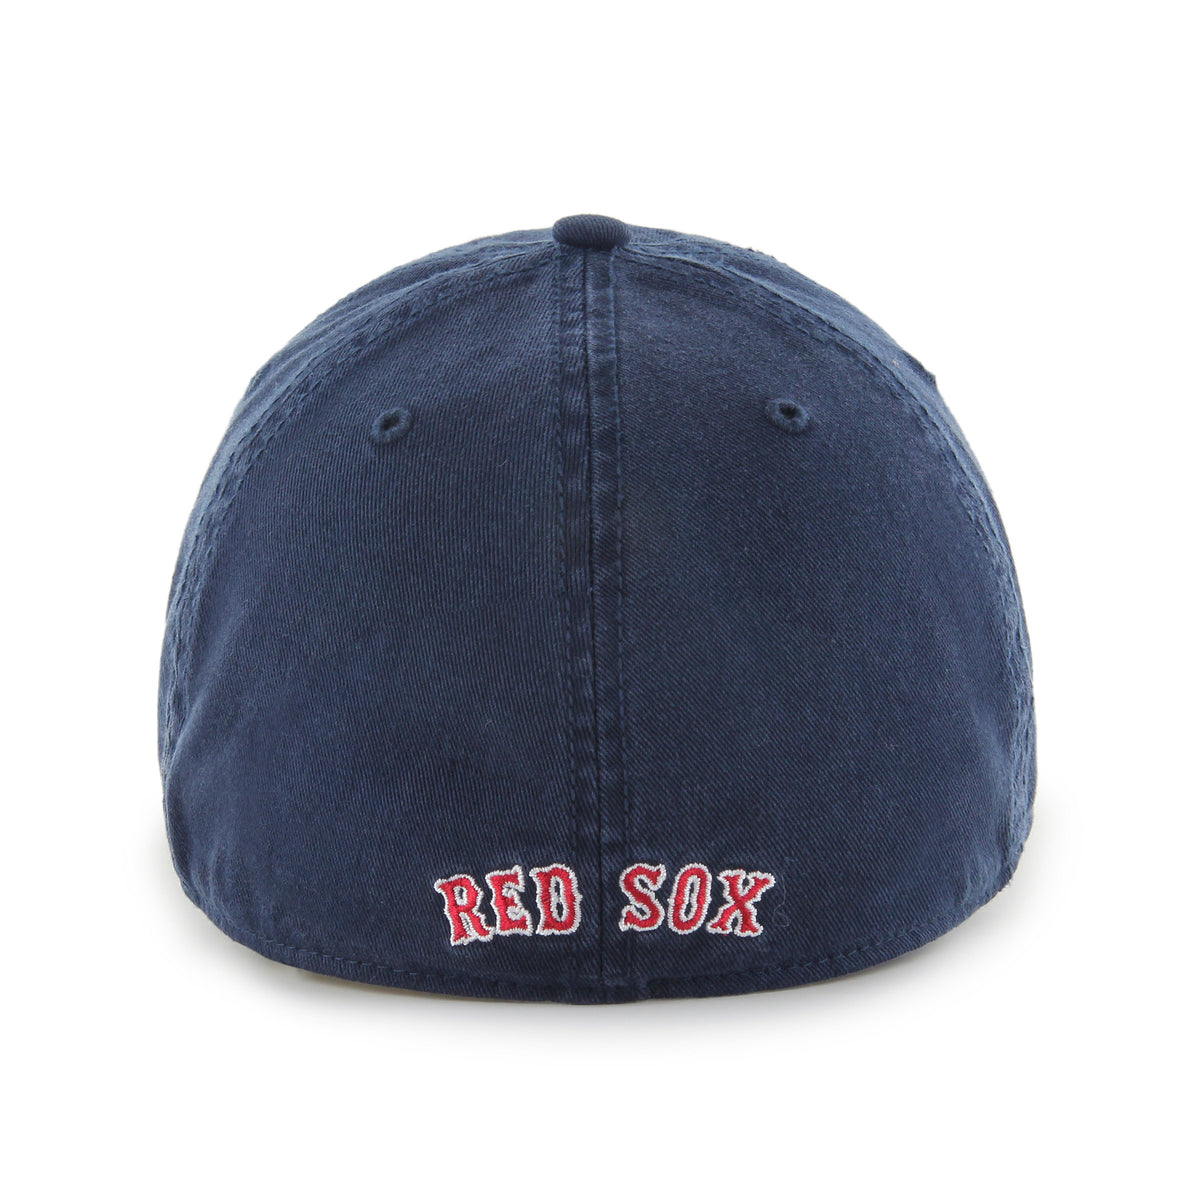 BOSTON RED SOX CLASSIC '47 FRANCHISE